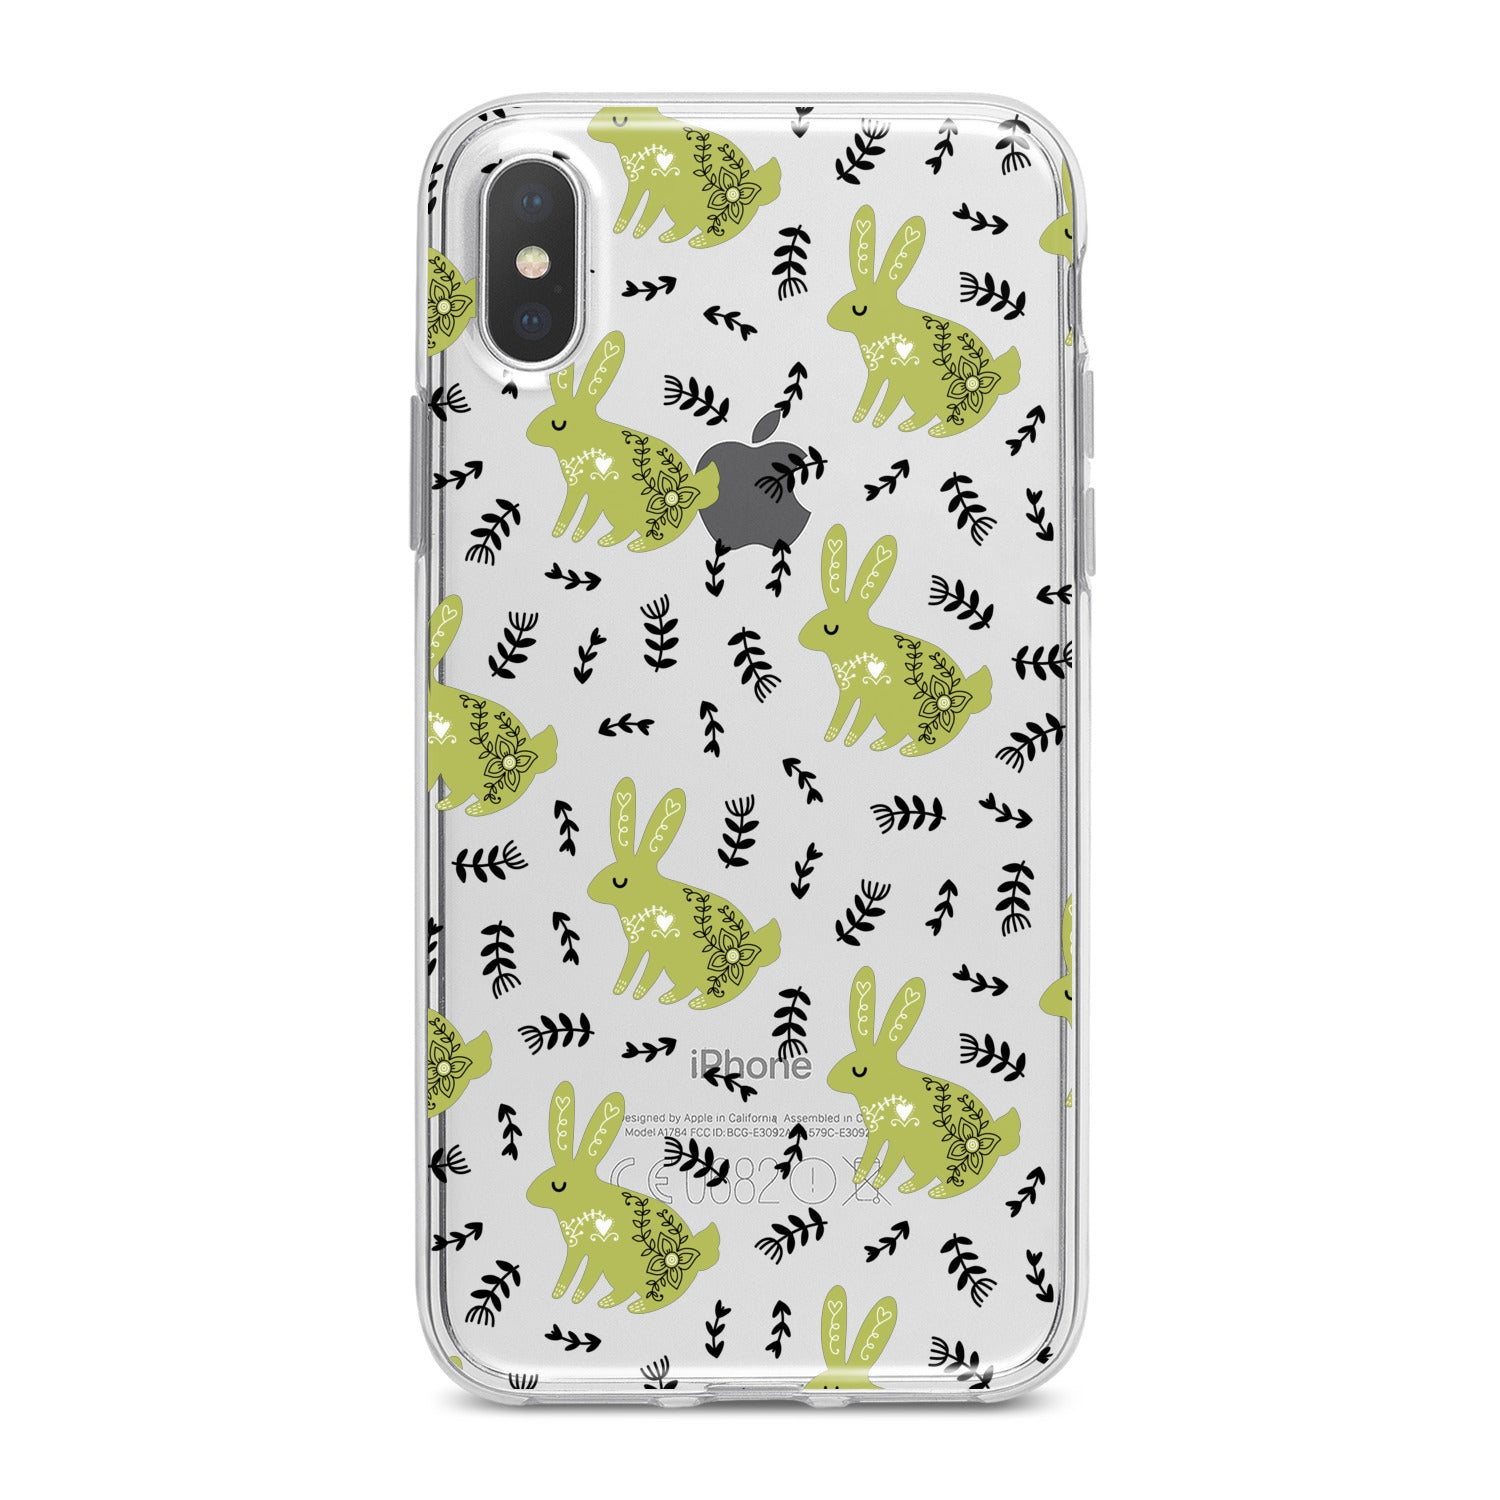 Lex Altern Green Bunnies Phone Case for your iPhone & Android phone.